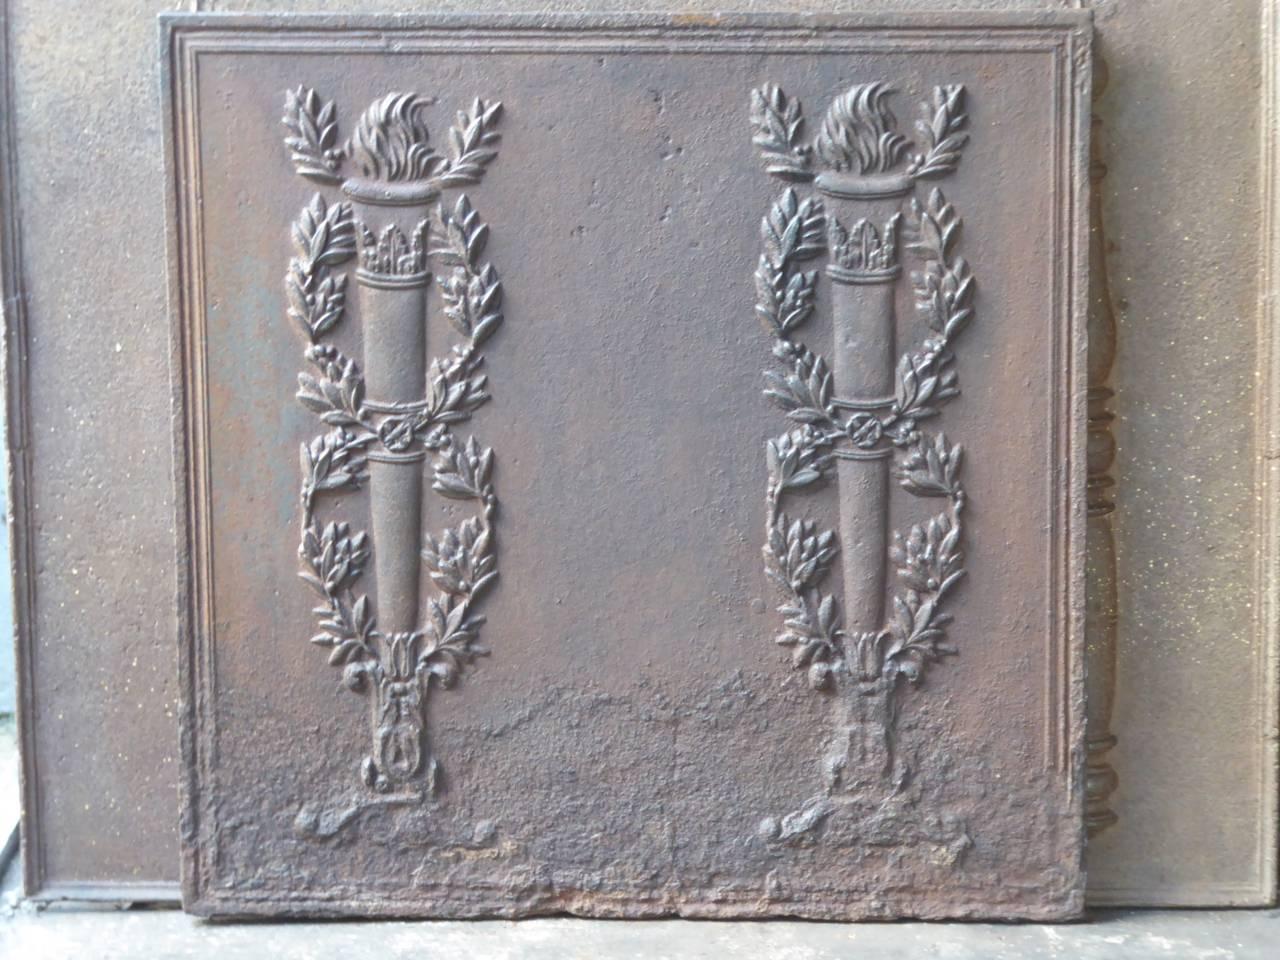 18th-19th century French fireback with two pillars of freedom. The pillars symbolize liberty, one of the three values of the French Revolution (liberté, egalité and fraternité).

We have a unique and specialized collection of antique and used